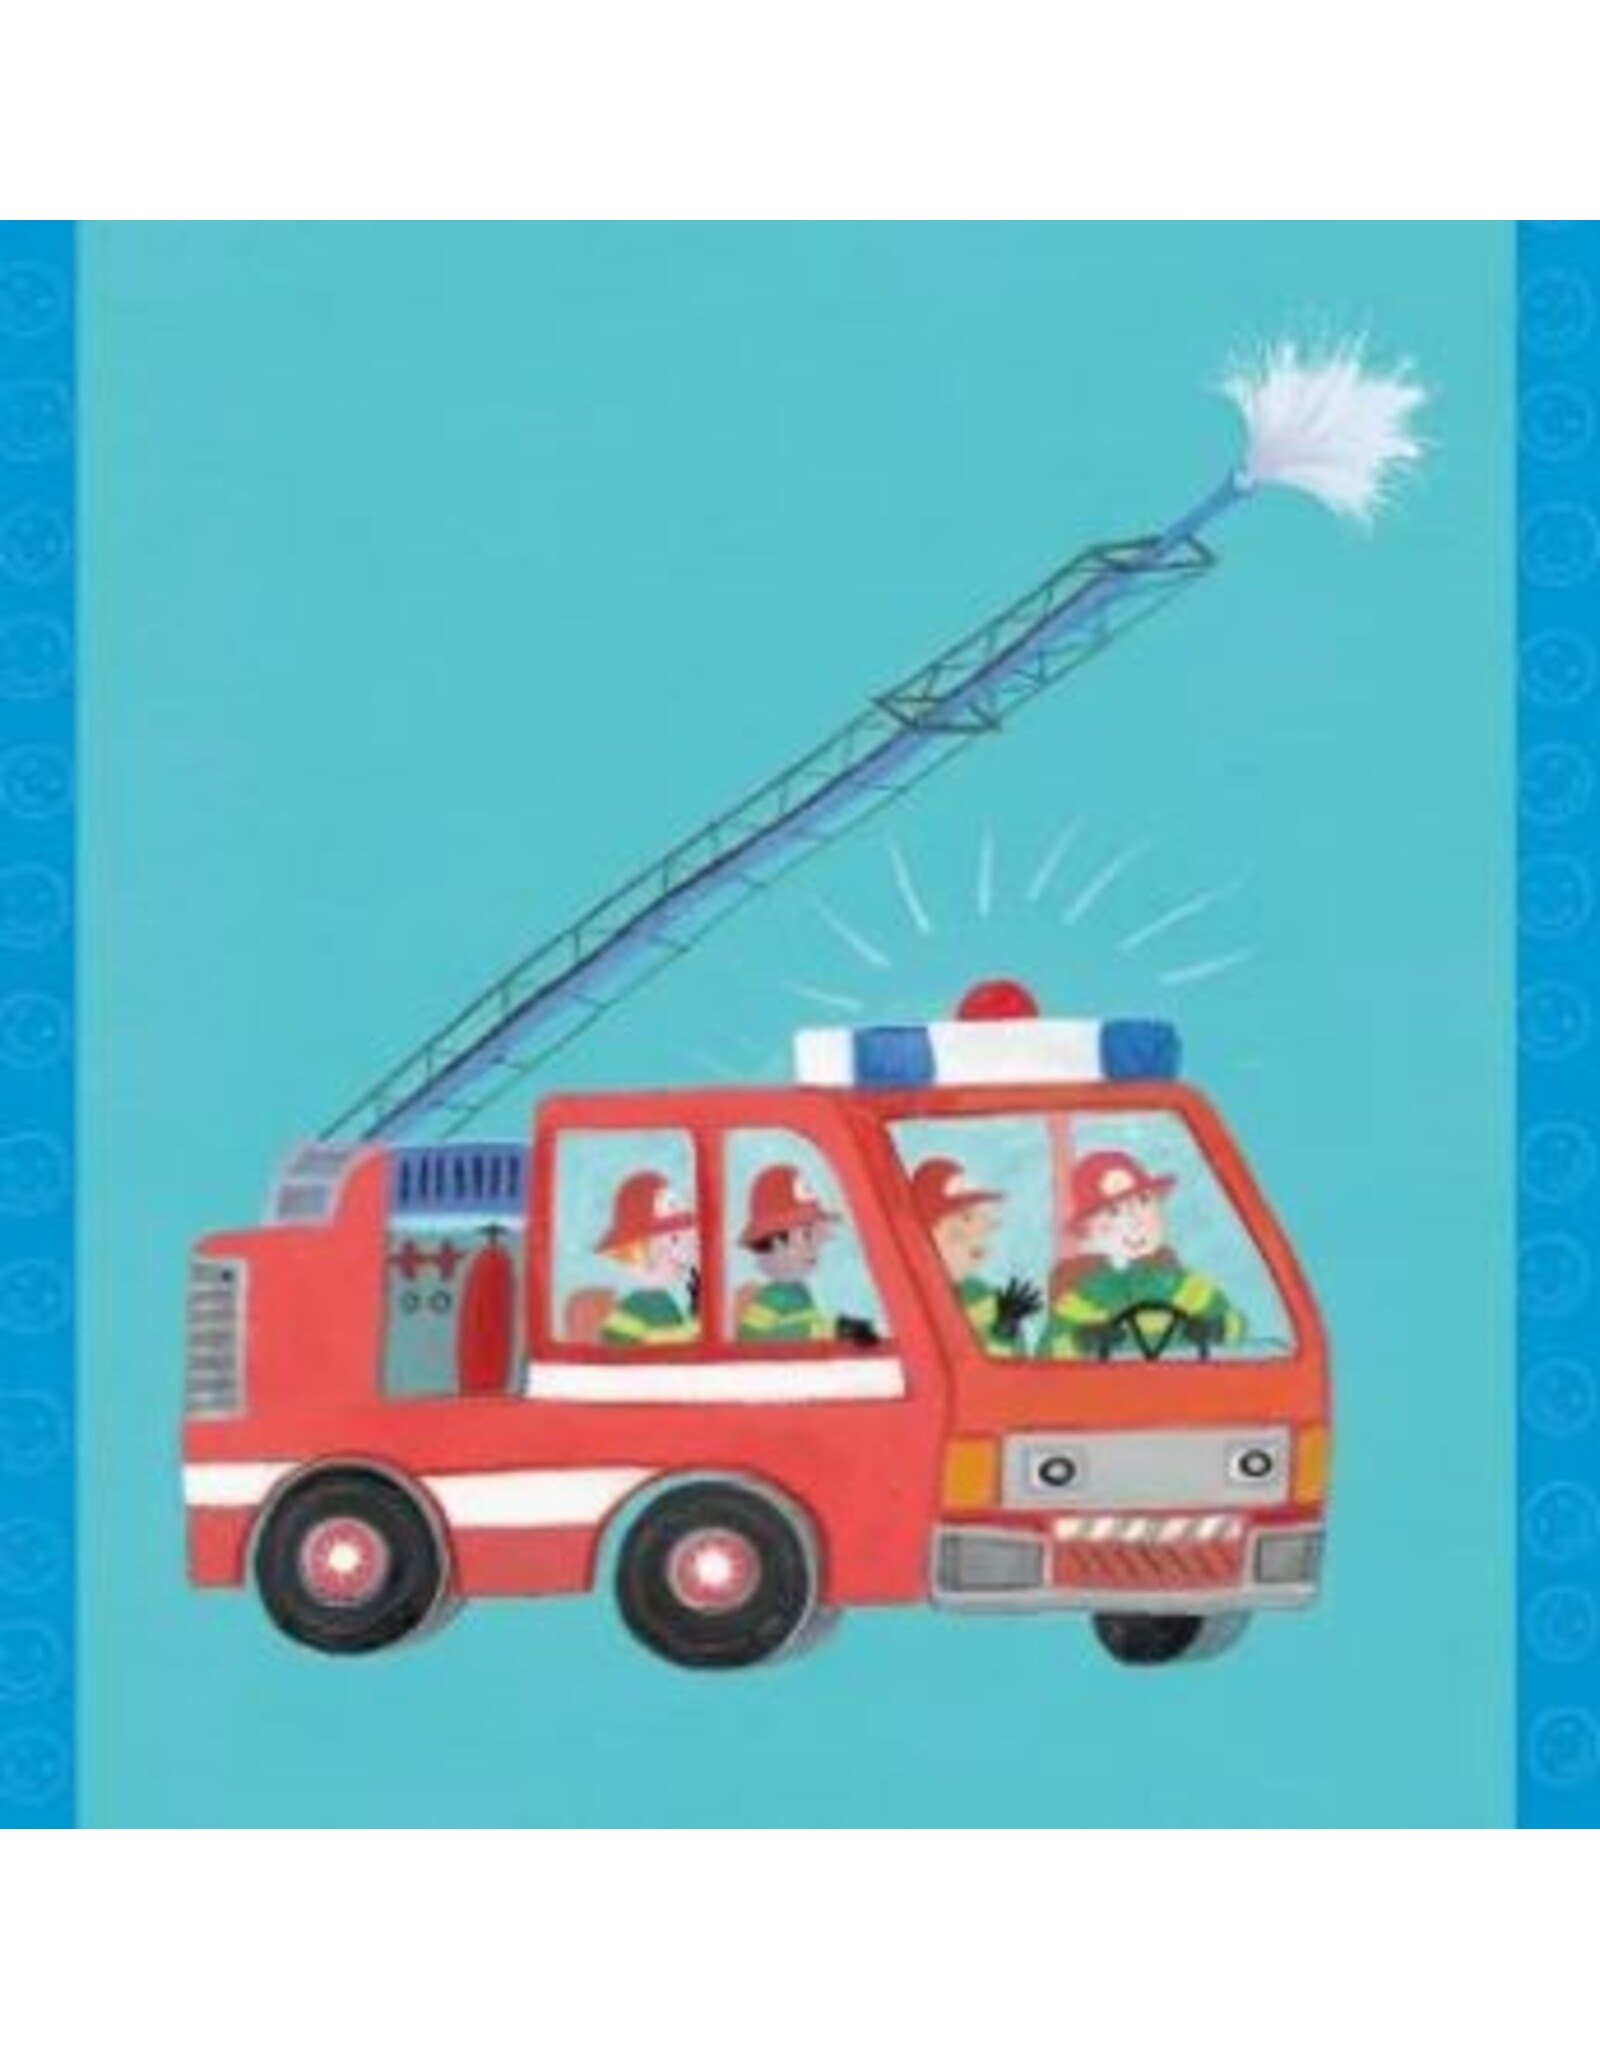 Build a Story Cards: Community Helpers